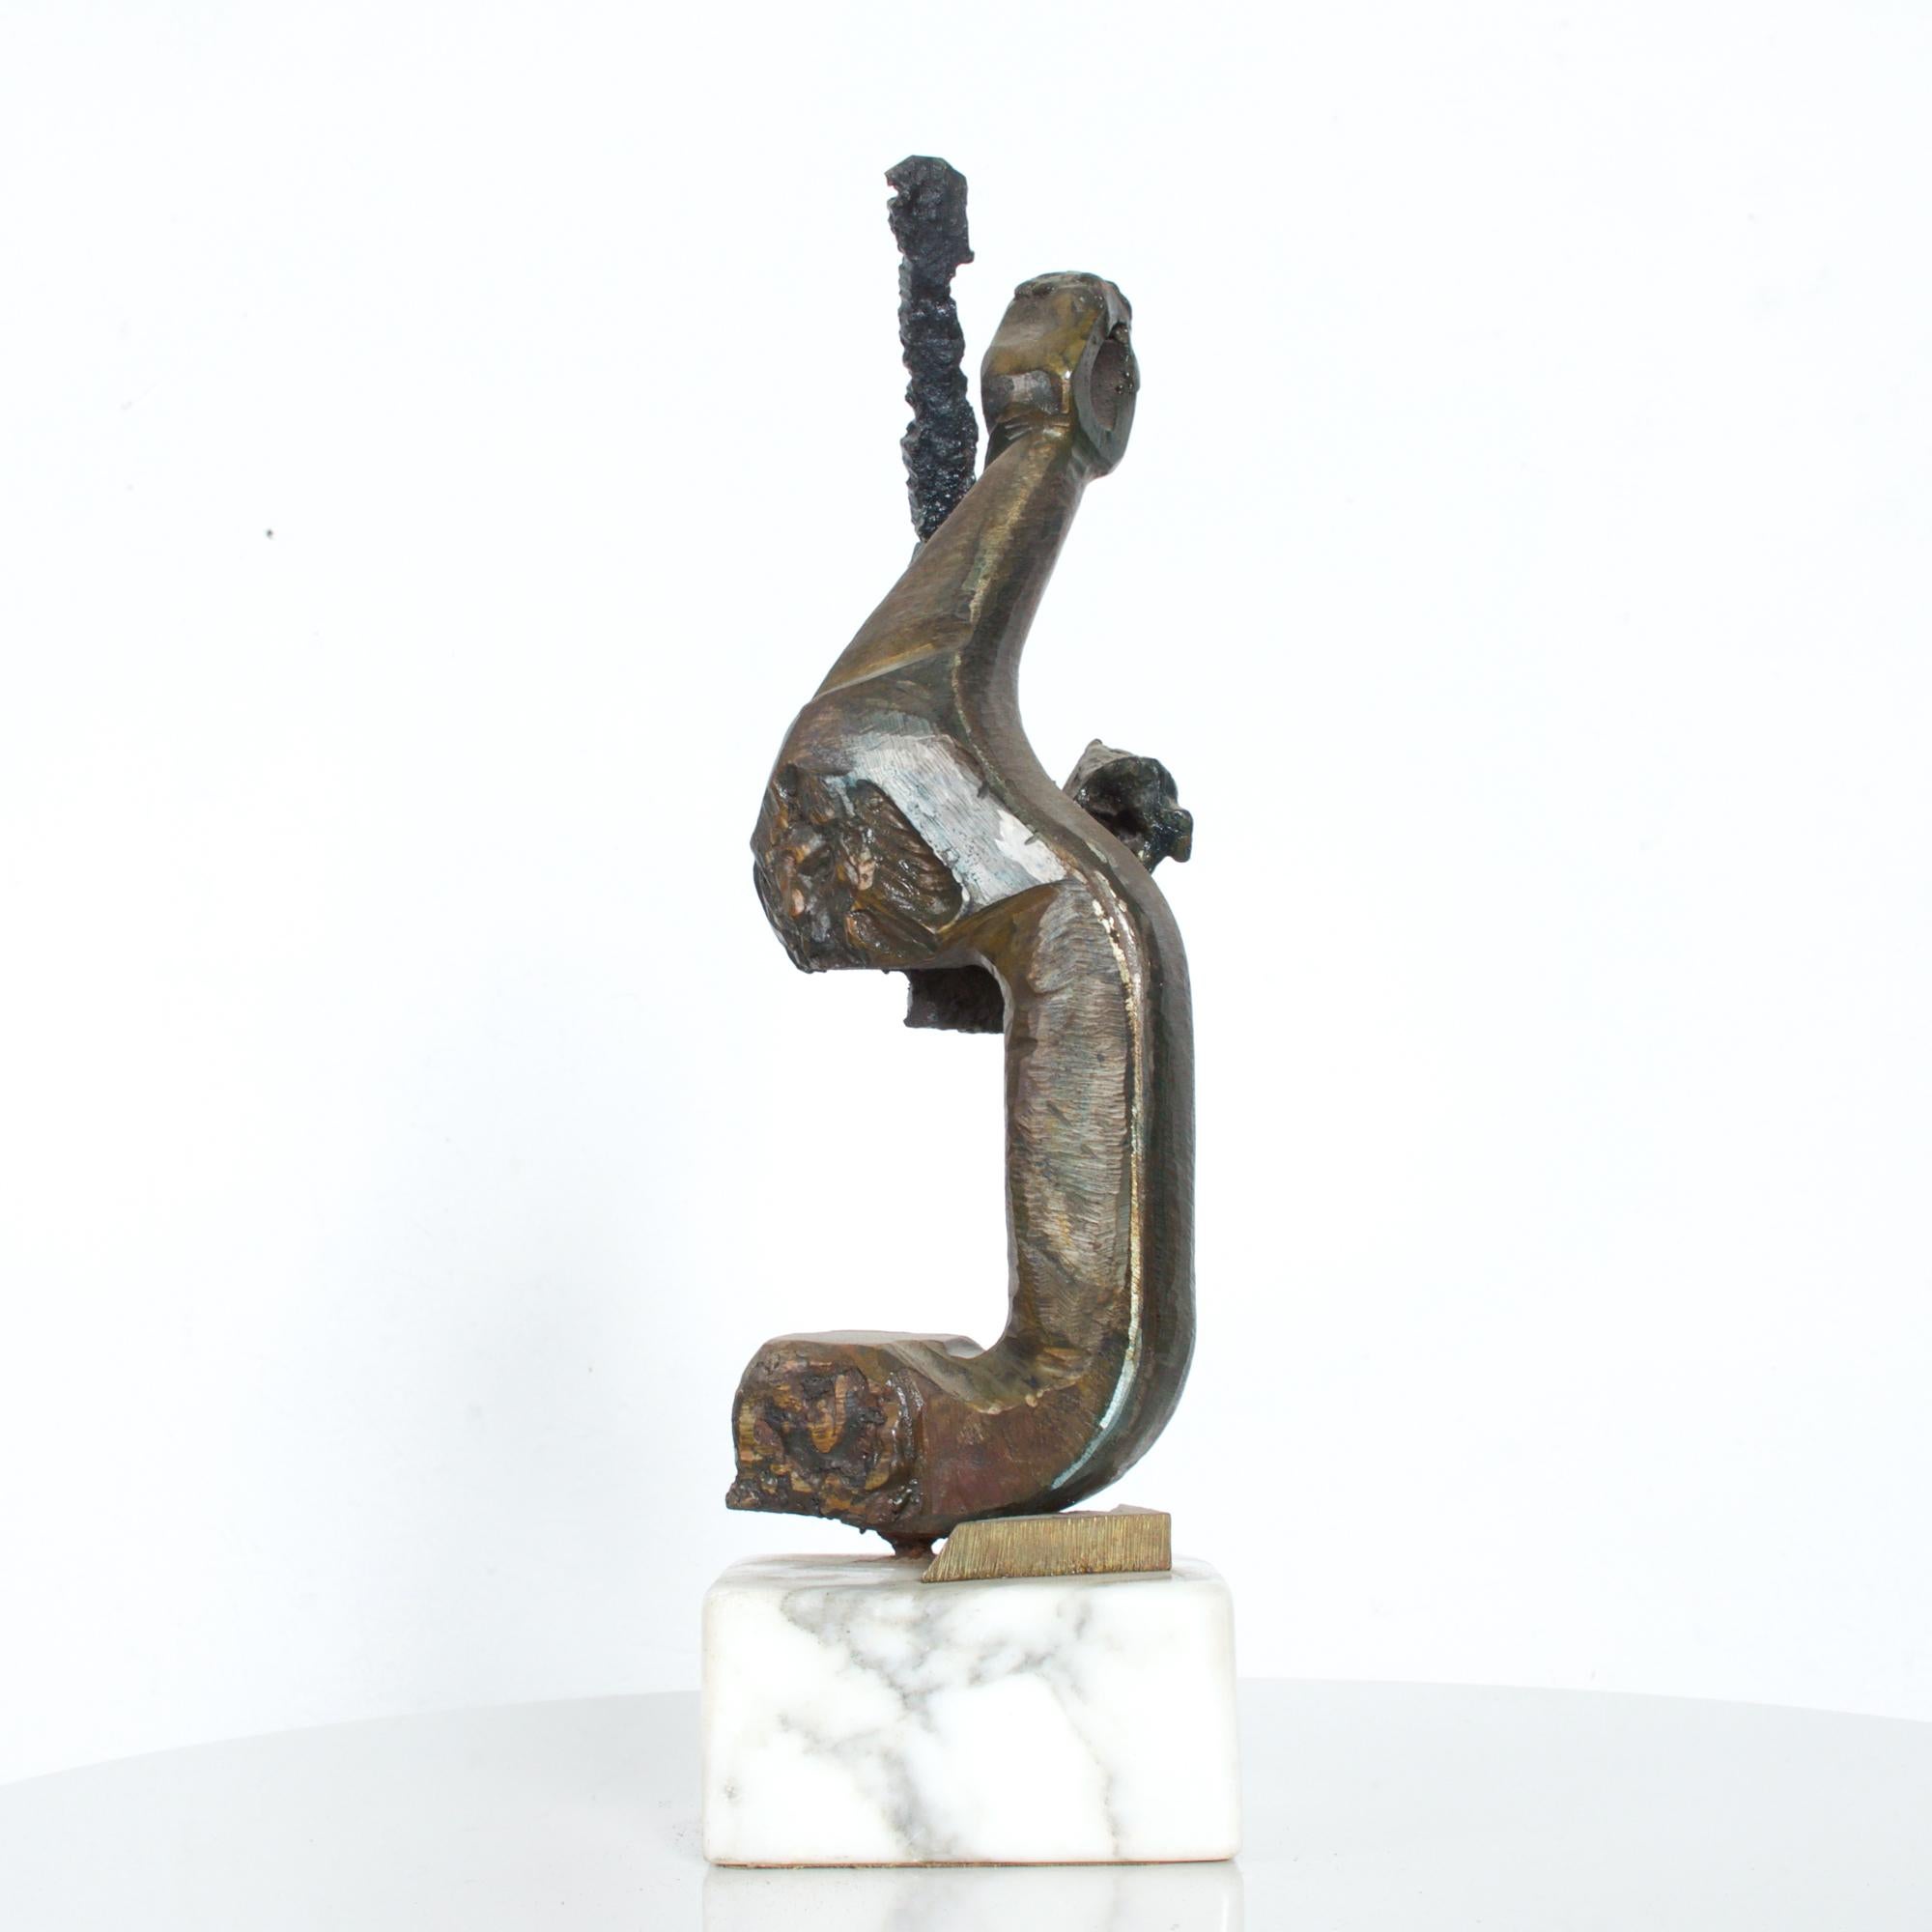 Late 20th Century Brutalist Twisted Metal Iron Sculpture on Marble Mount after Mathias Goeritz